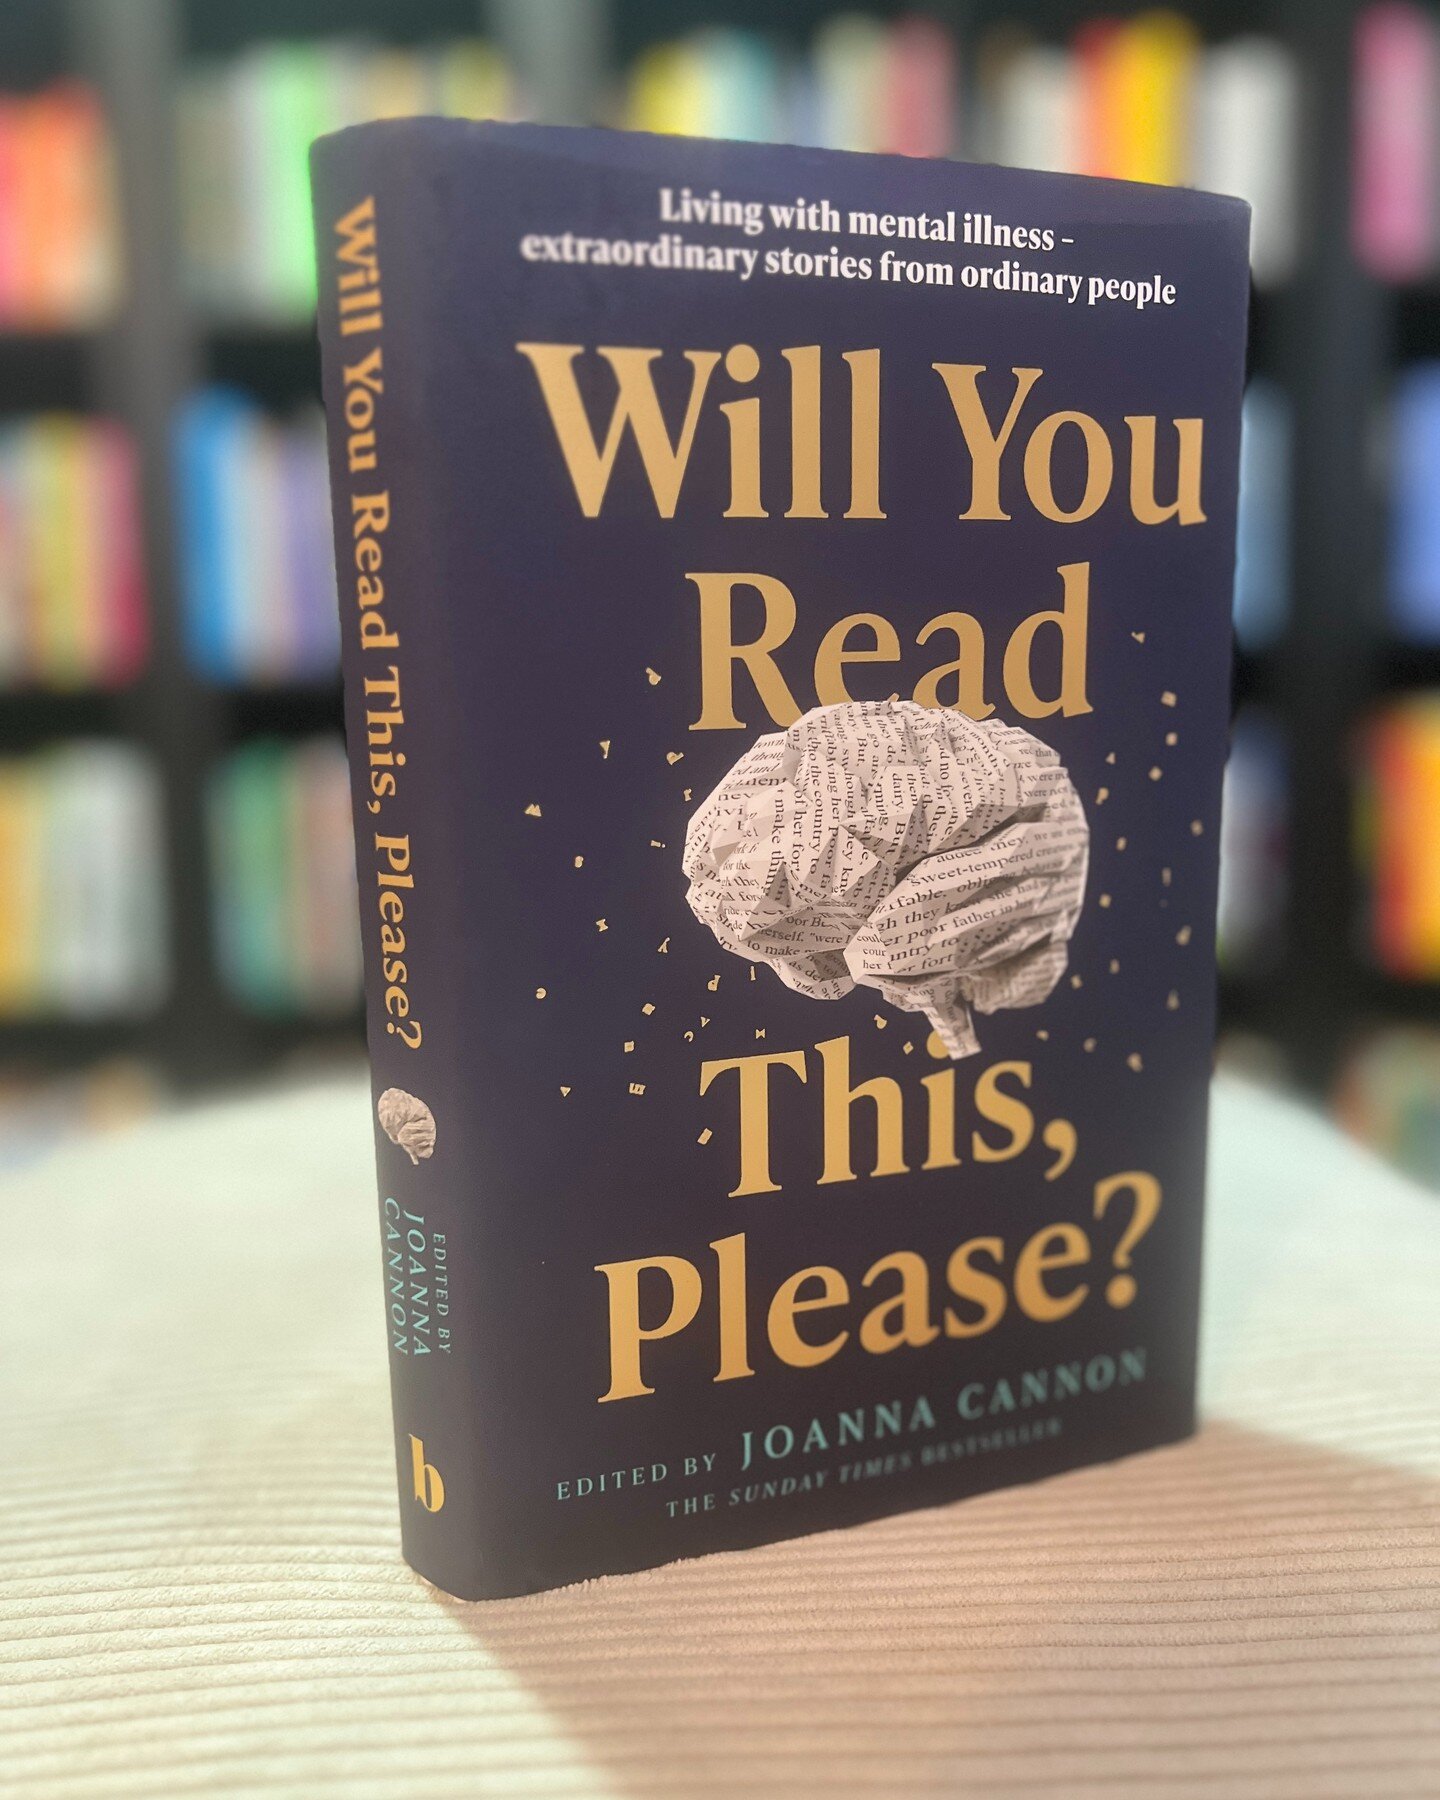 Today is publication day for #WillYouReadThisPlease. A book that began life as a tweet. 

Every book takes a village. This took a whole city &amp; I'm SO proud of us all. Thank you to everyone who helped with this project along its journey to publica